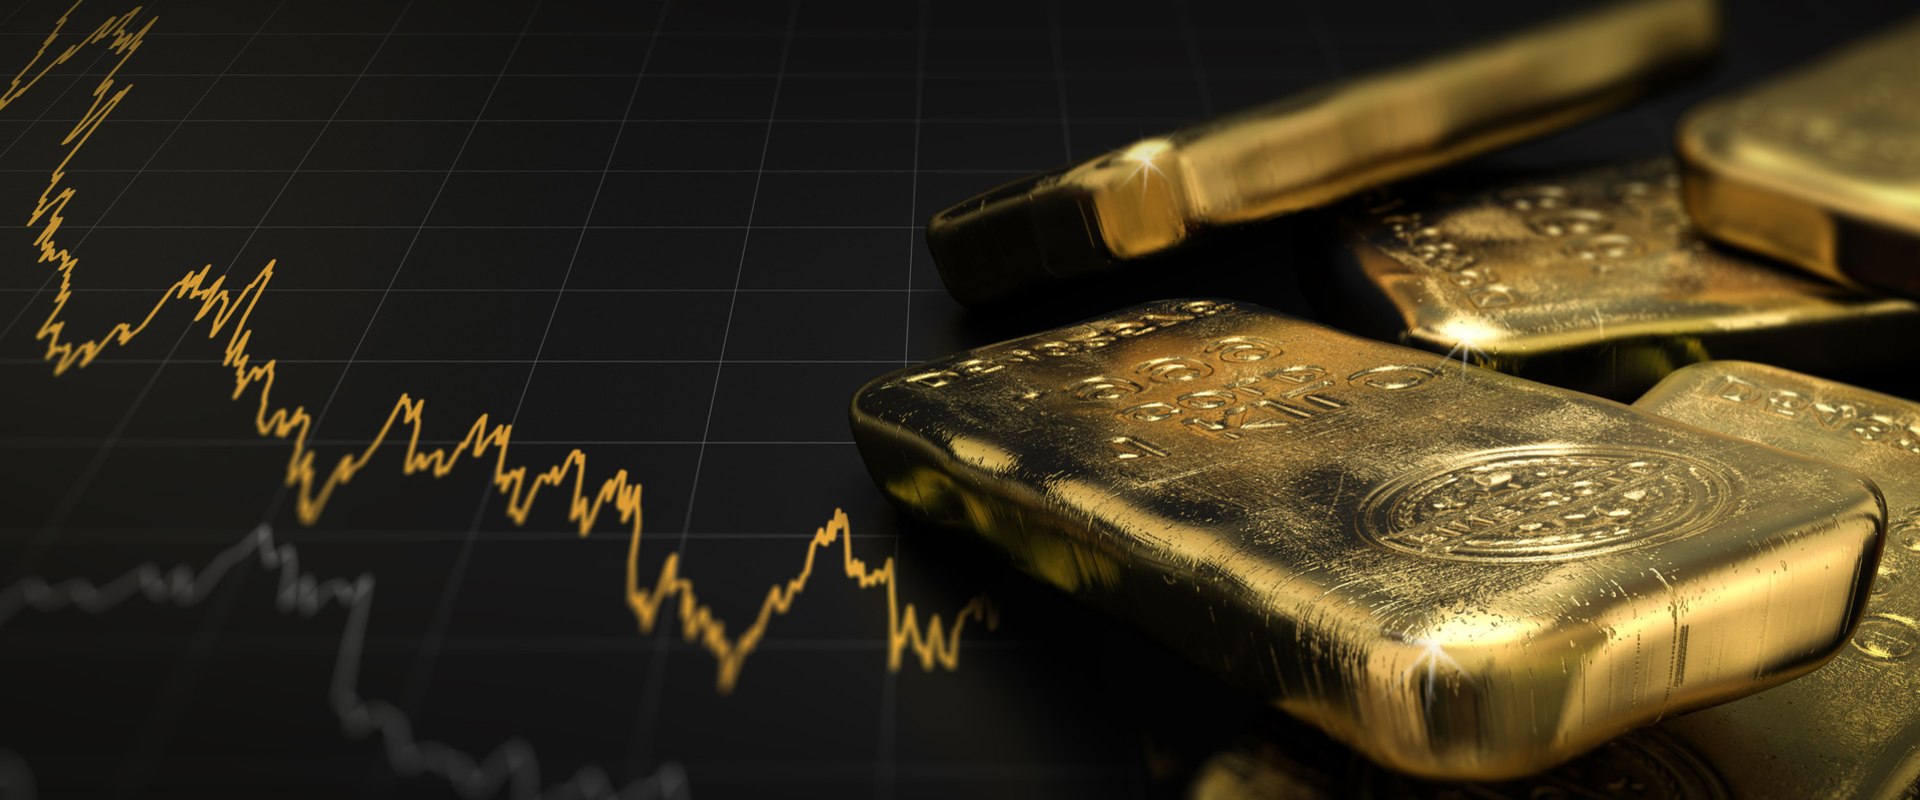 Which is a better long term investment gold or silver?